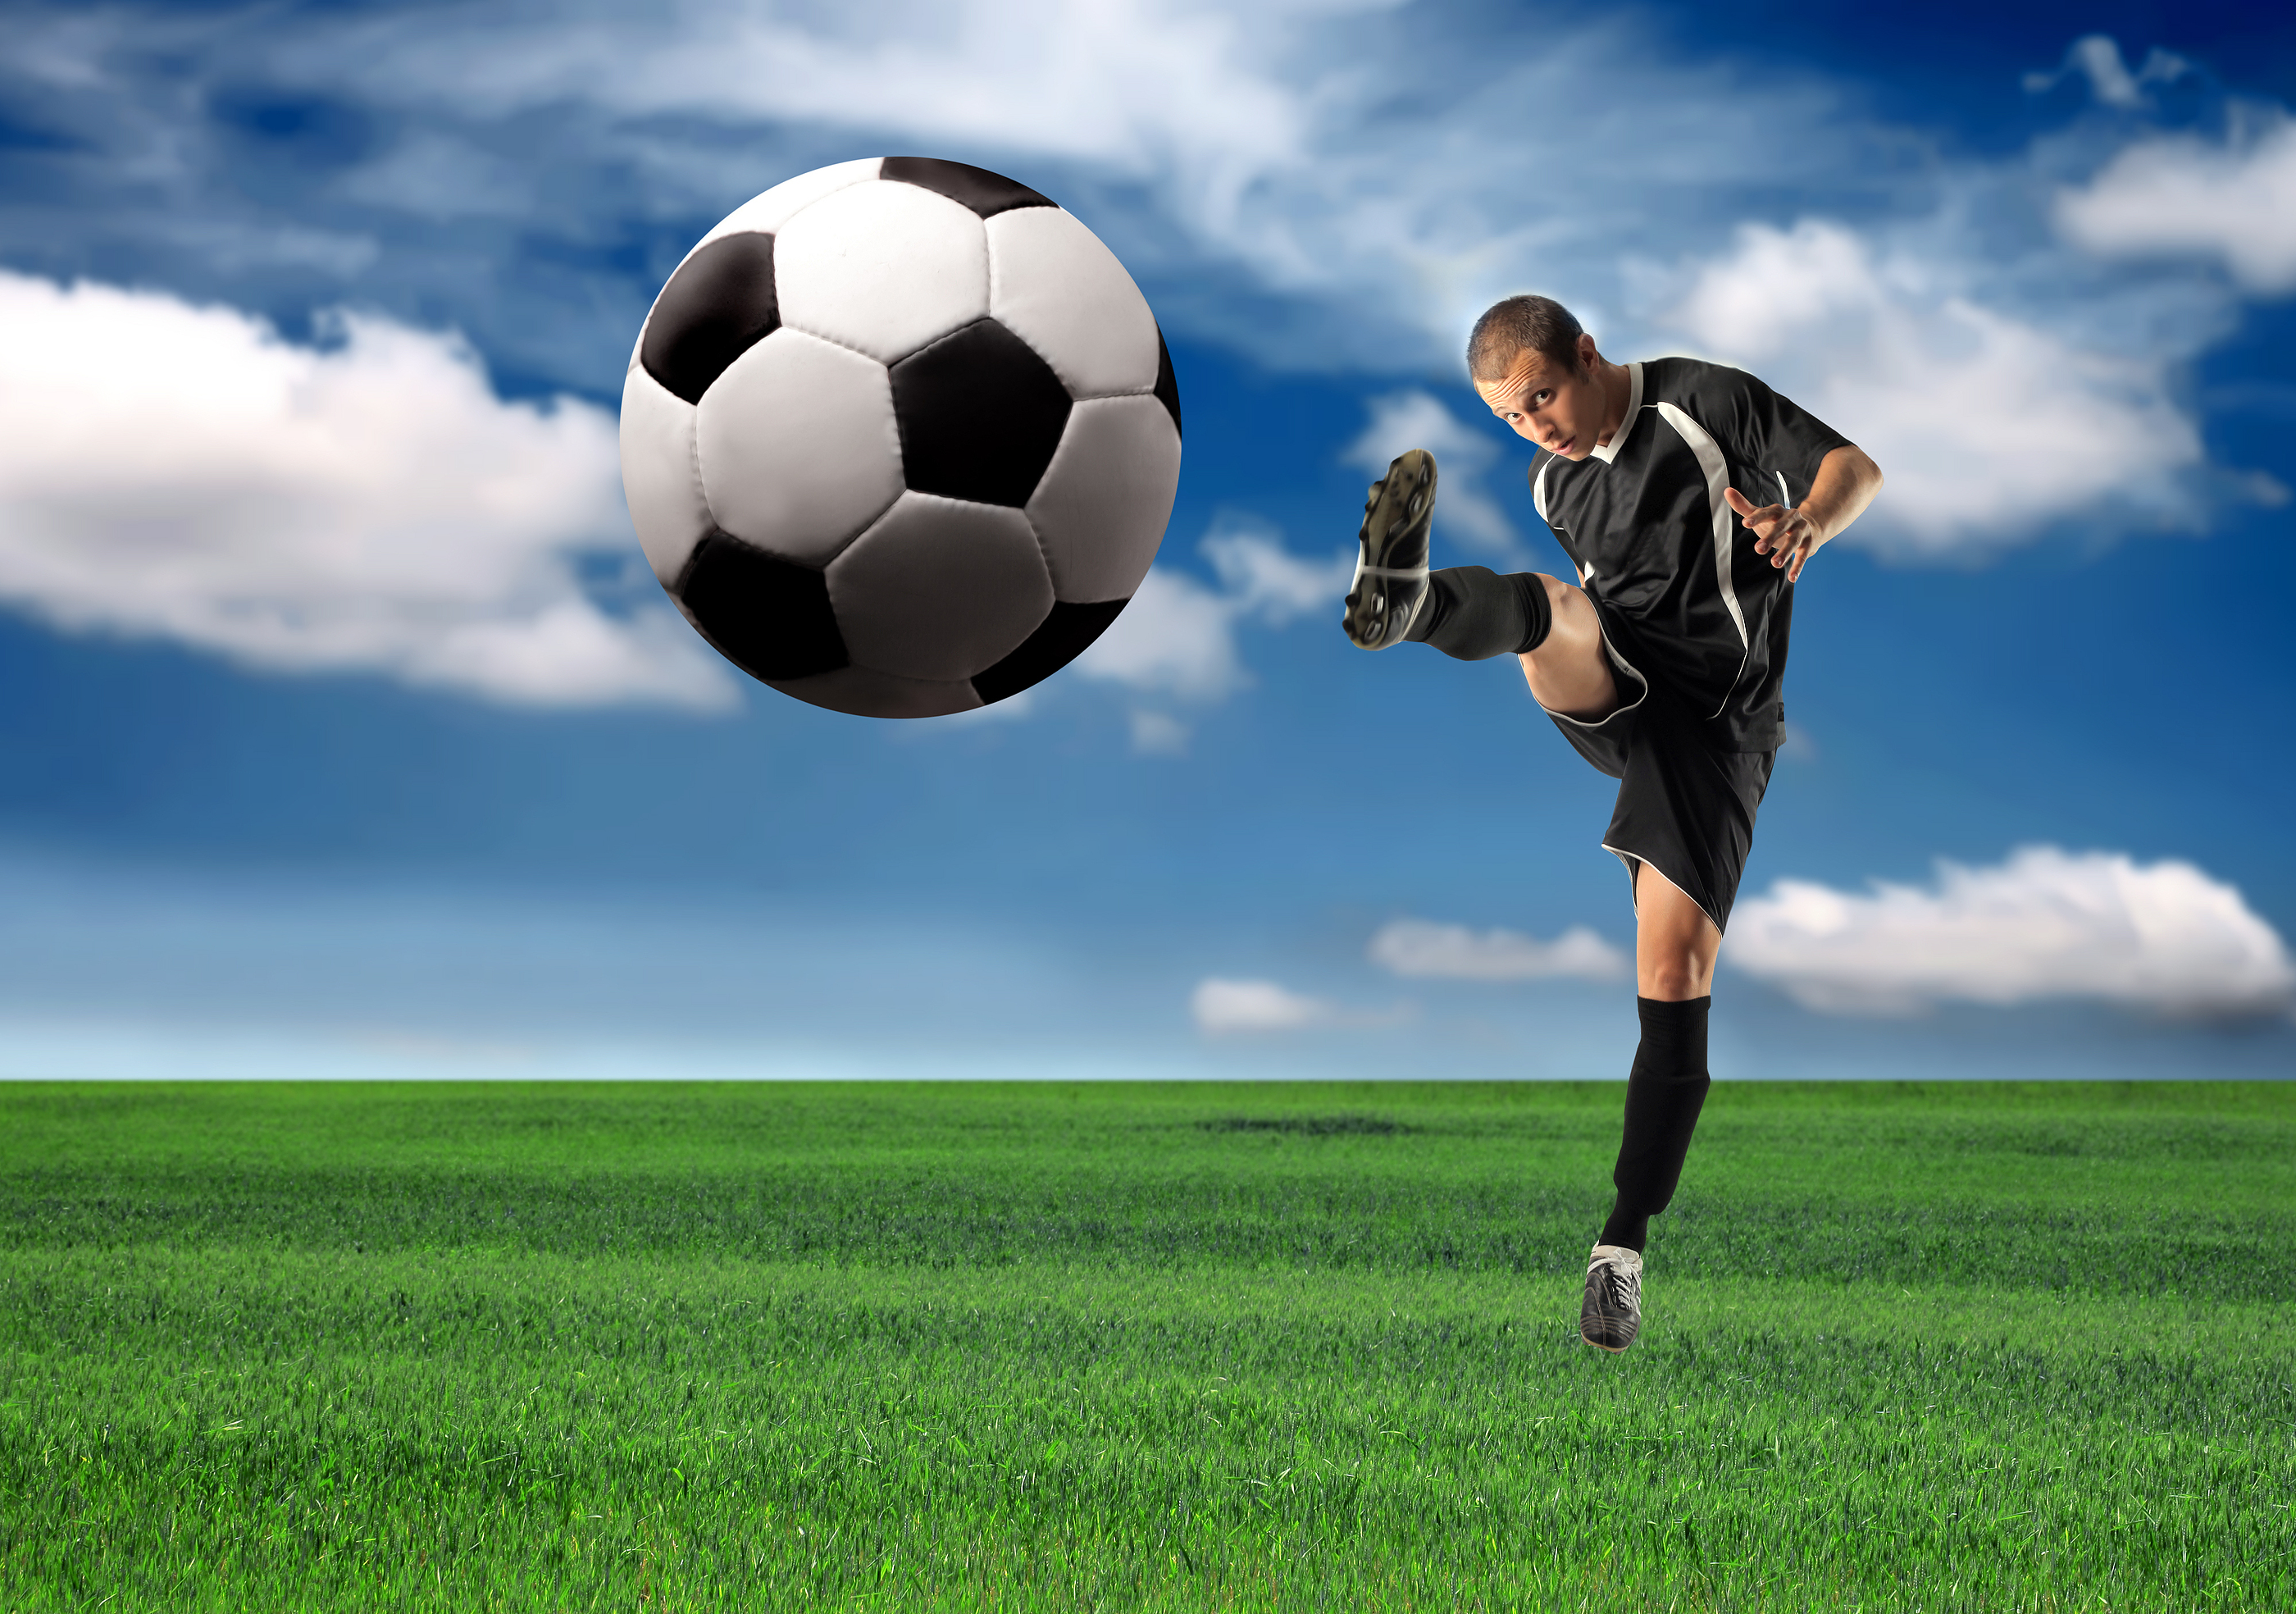 Kick Of The Ball Wallpapers High Quality Download Free